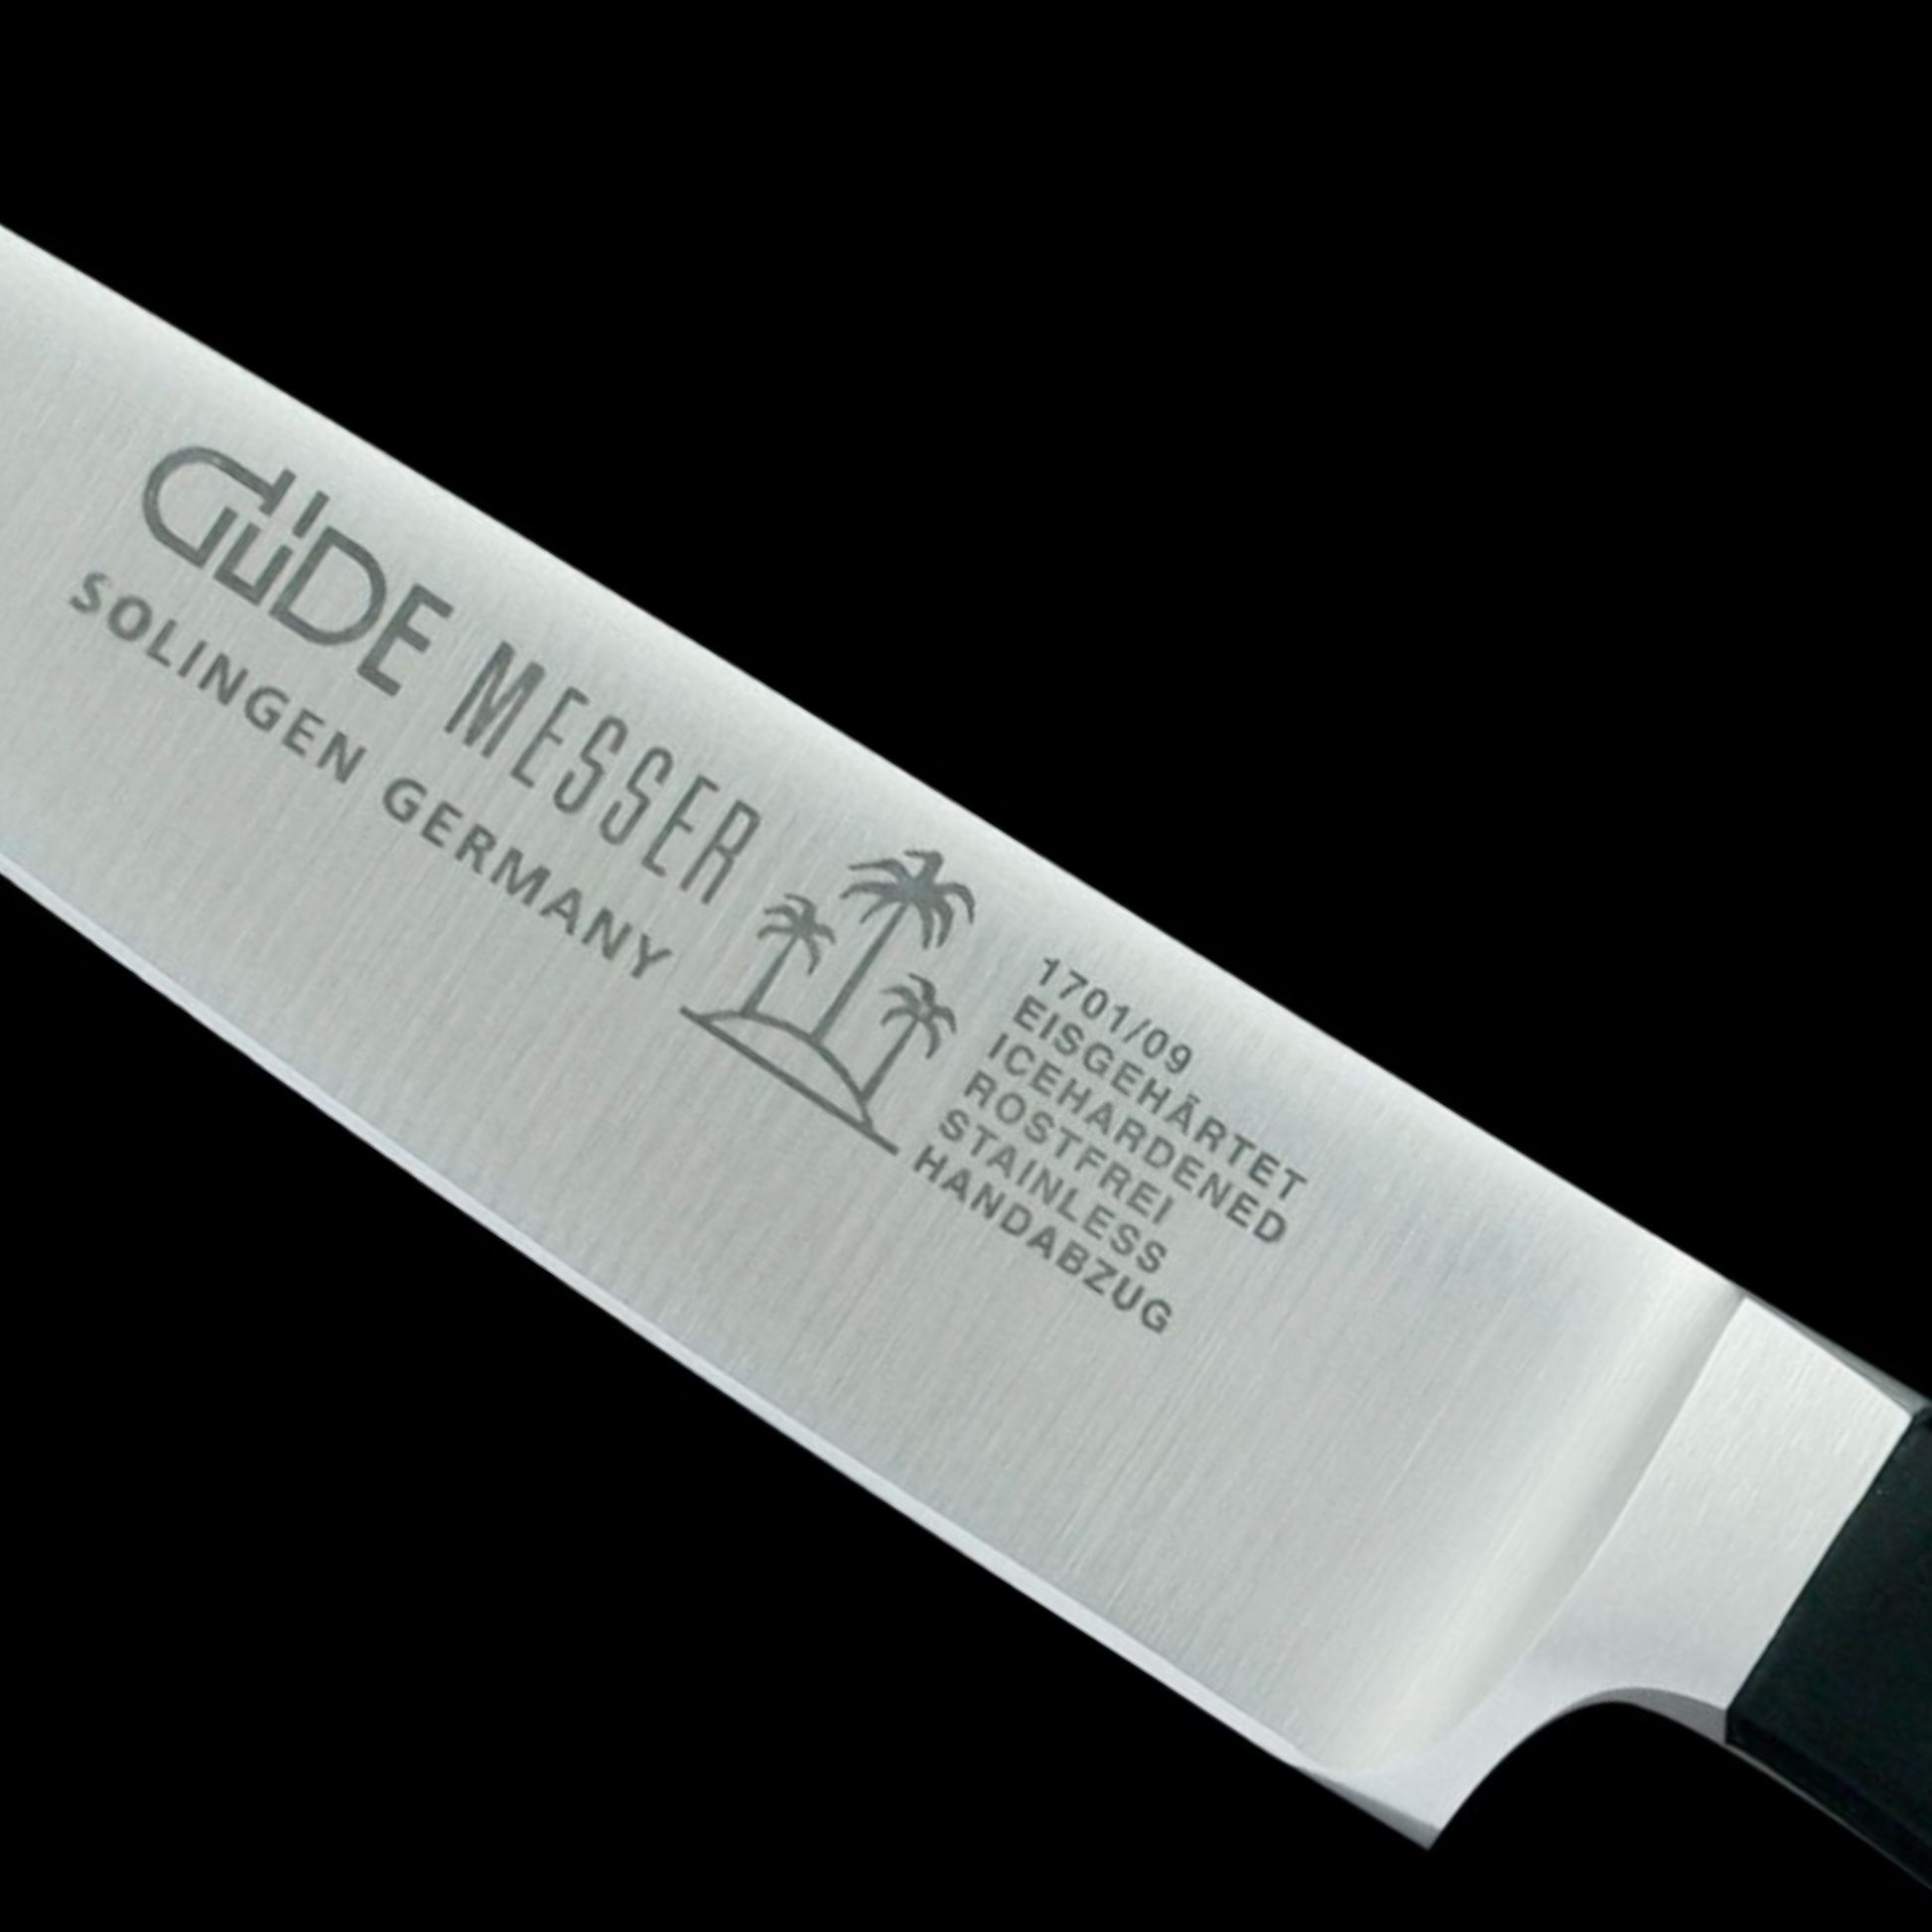 Knives by Cooks Club Quality & Design Set, Stainless, Made in Taiwan